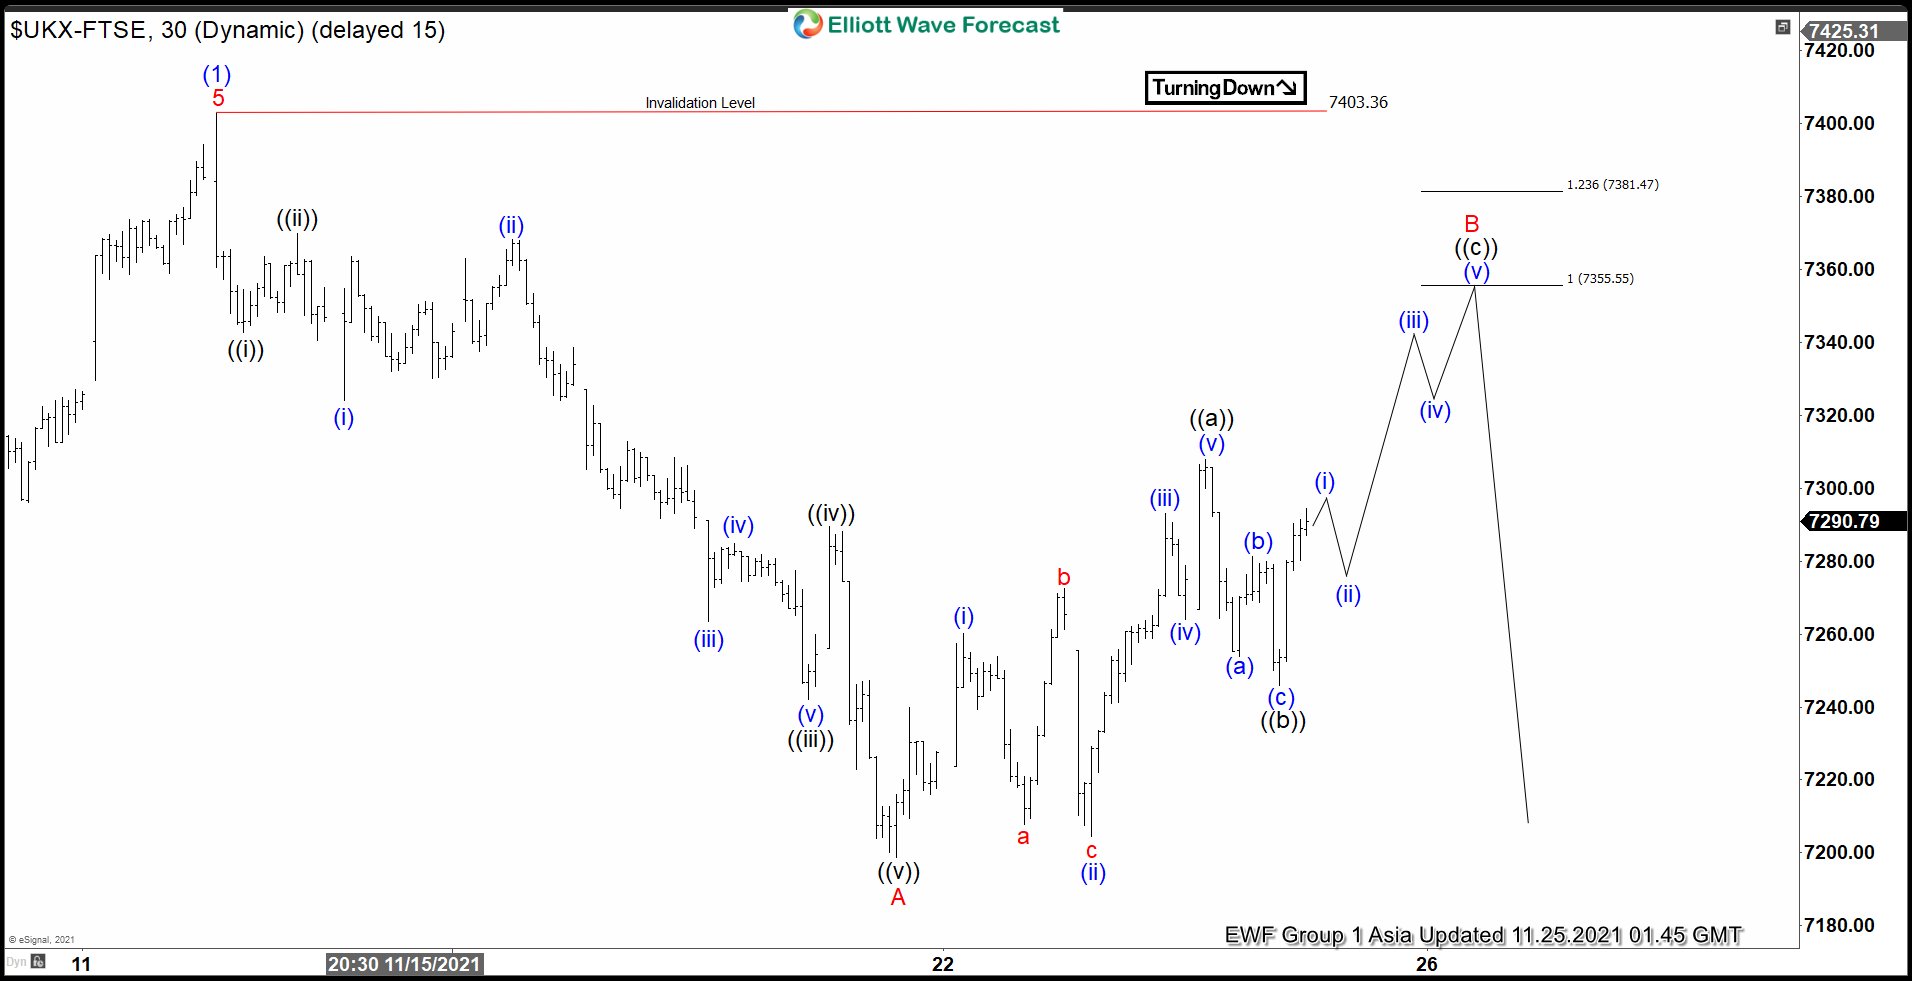 Elliott Wave View: Rally in FTSE Expected to Fail